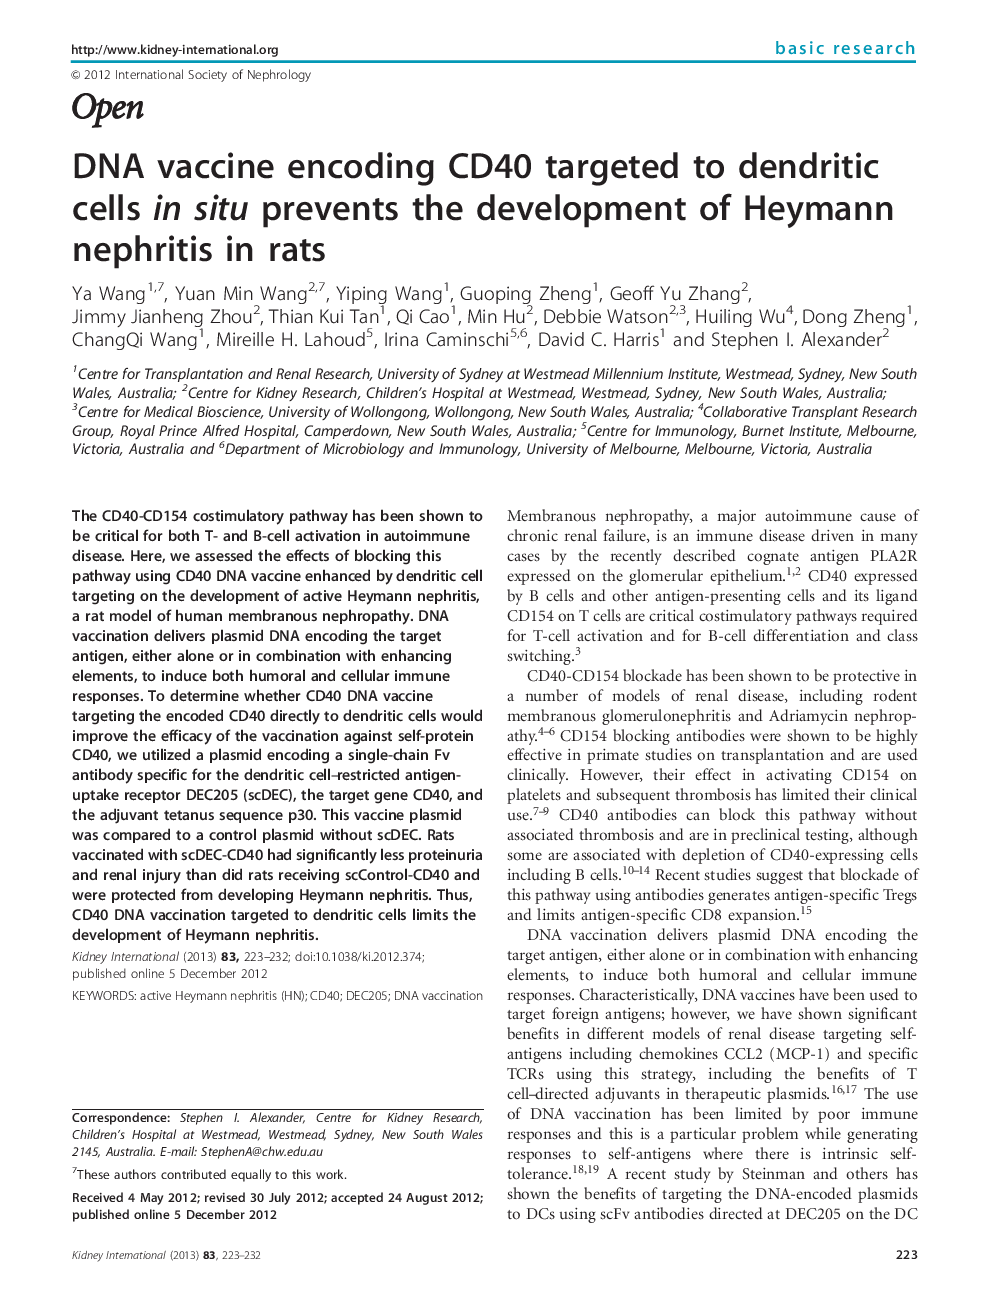 DNA vaccine encoding CD40 targeted to dendritic cells in situ prevents the development of Heymann nephritis in rats